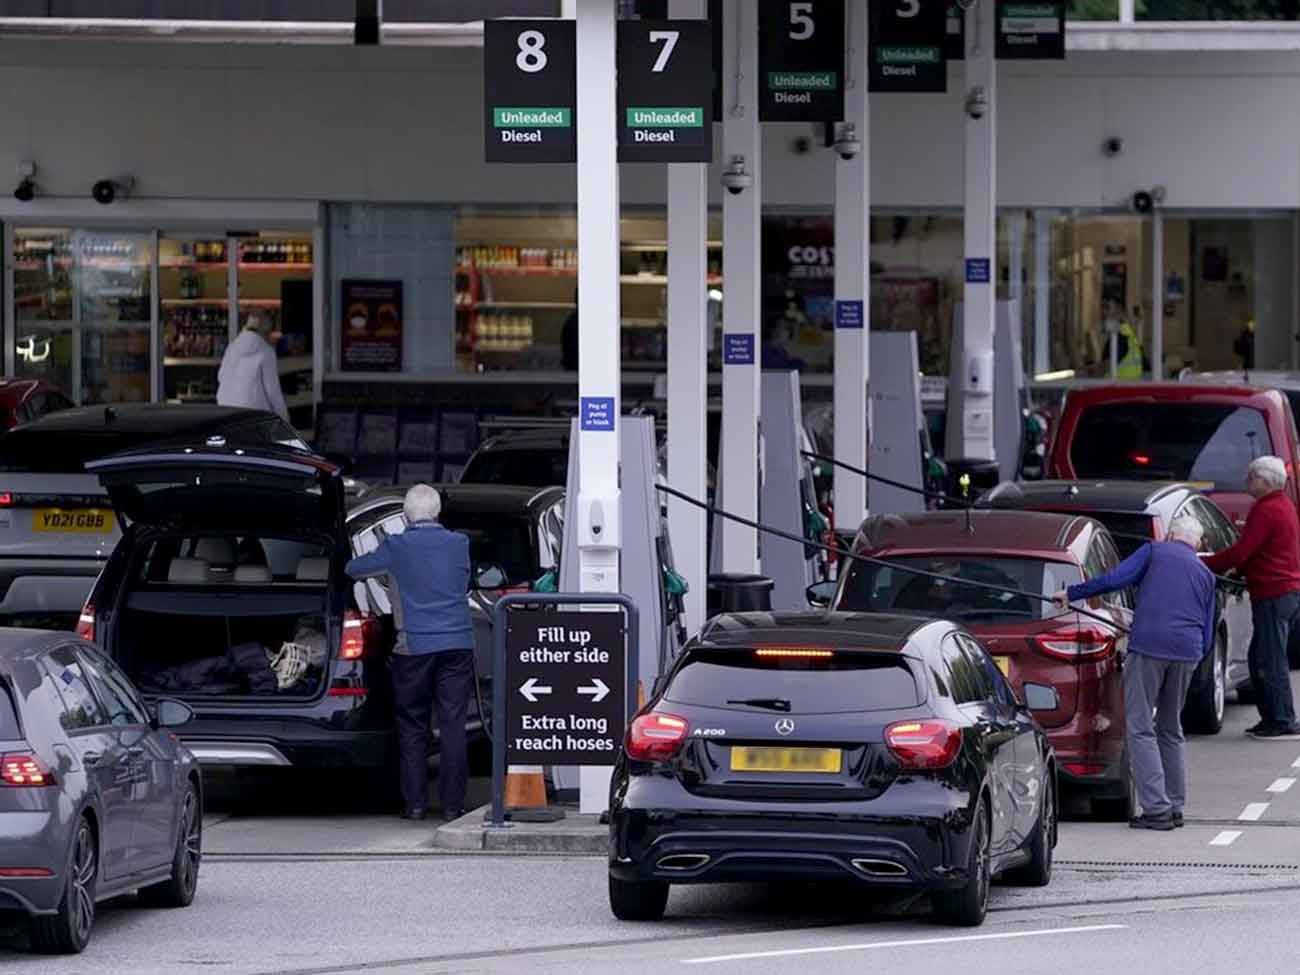 Cars refueling at a petrol station